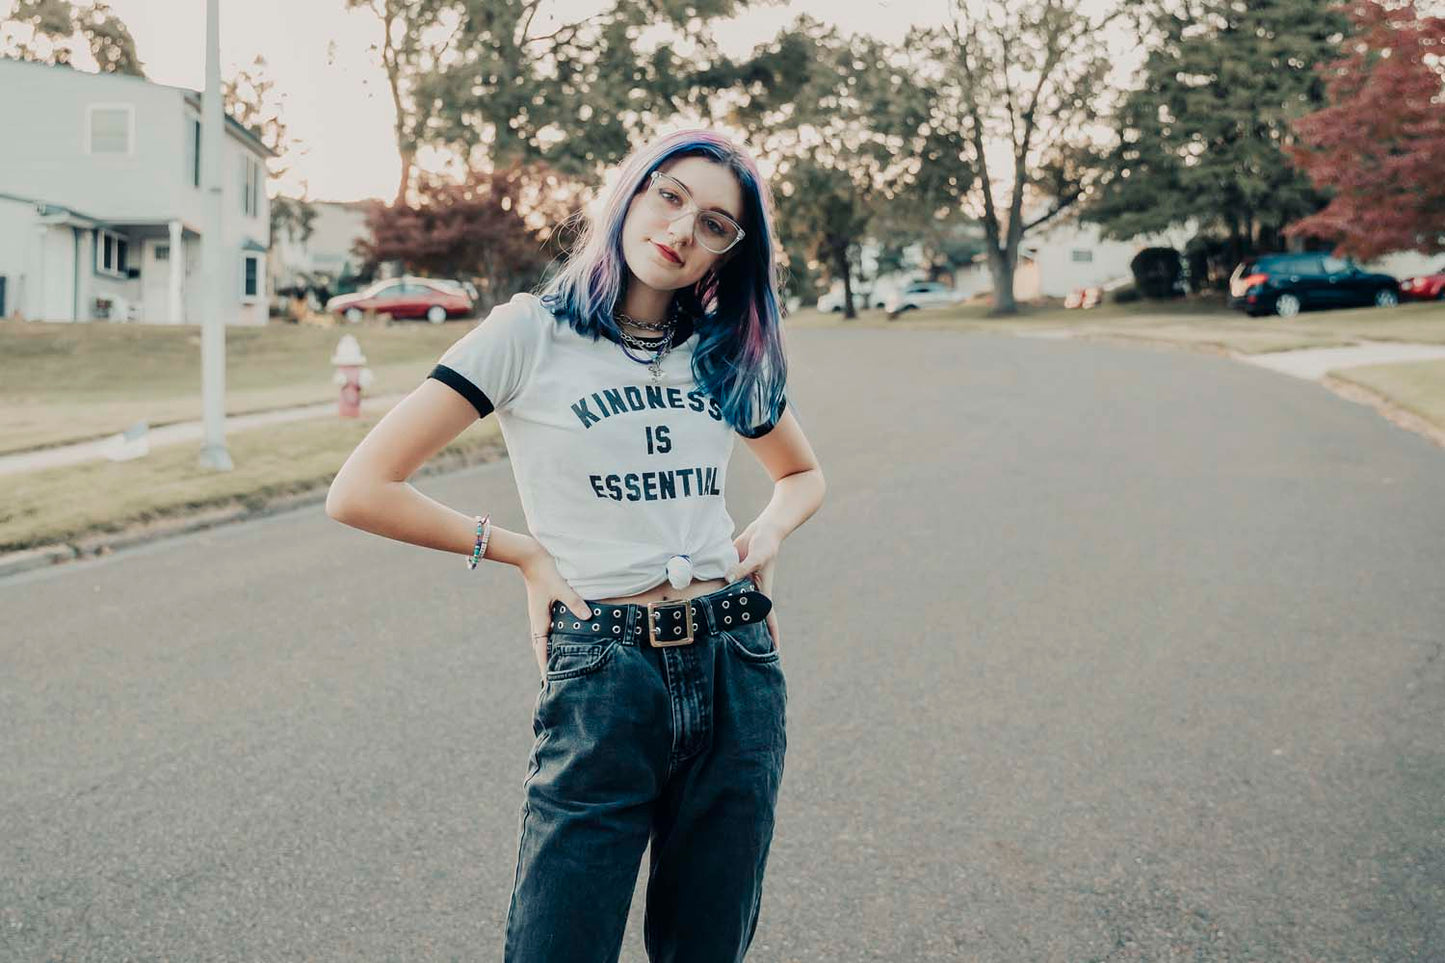 Kindness is Essential - Retro Fitted Ringer